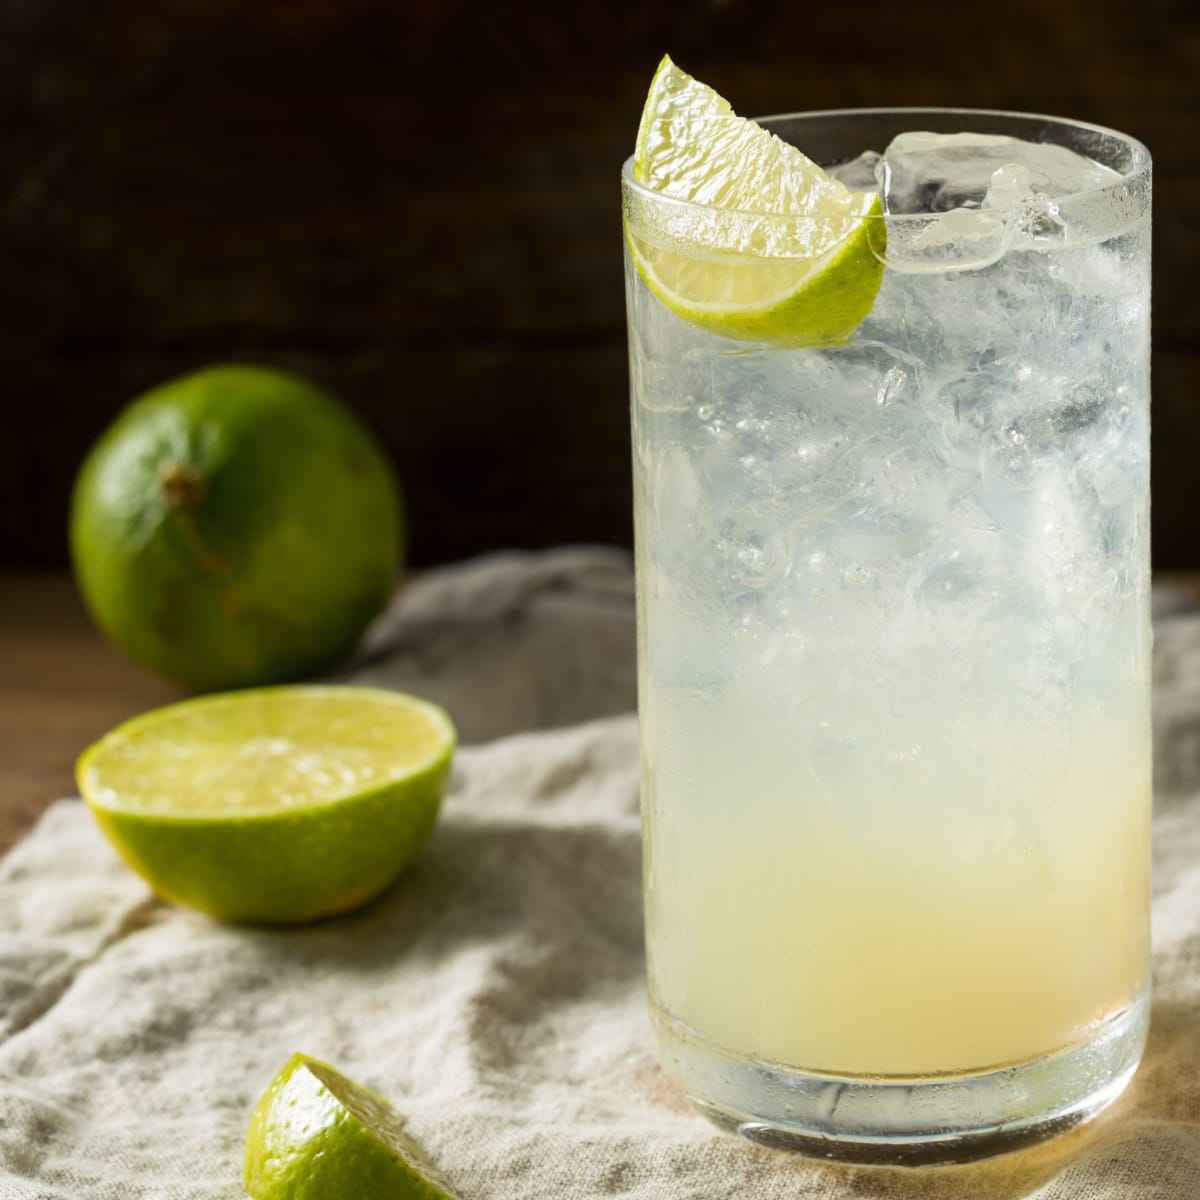 Refreshing glass of ice cold Gin Rickey garnished with sliced green lime, and whole and sliced limes on side